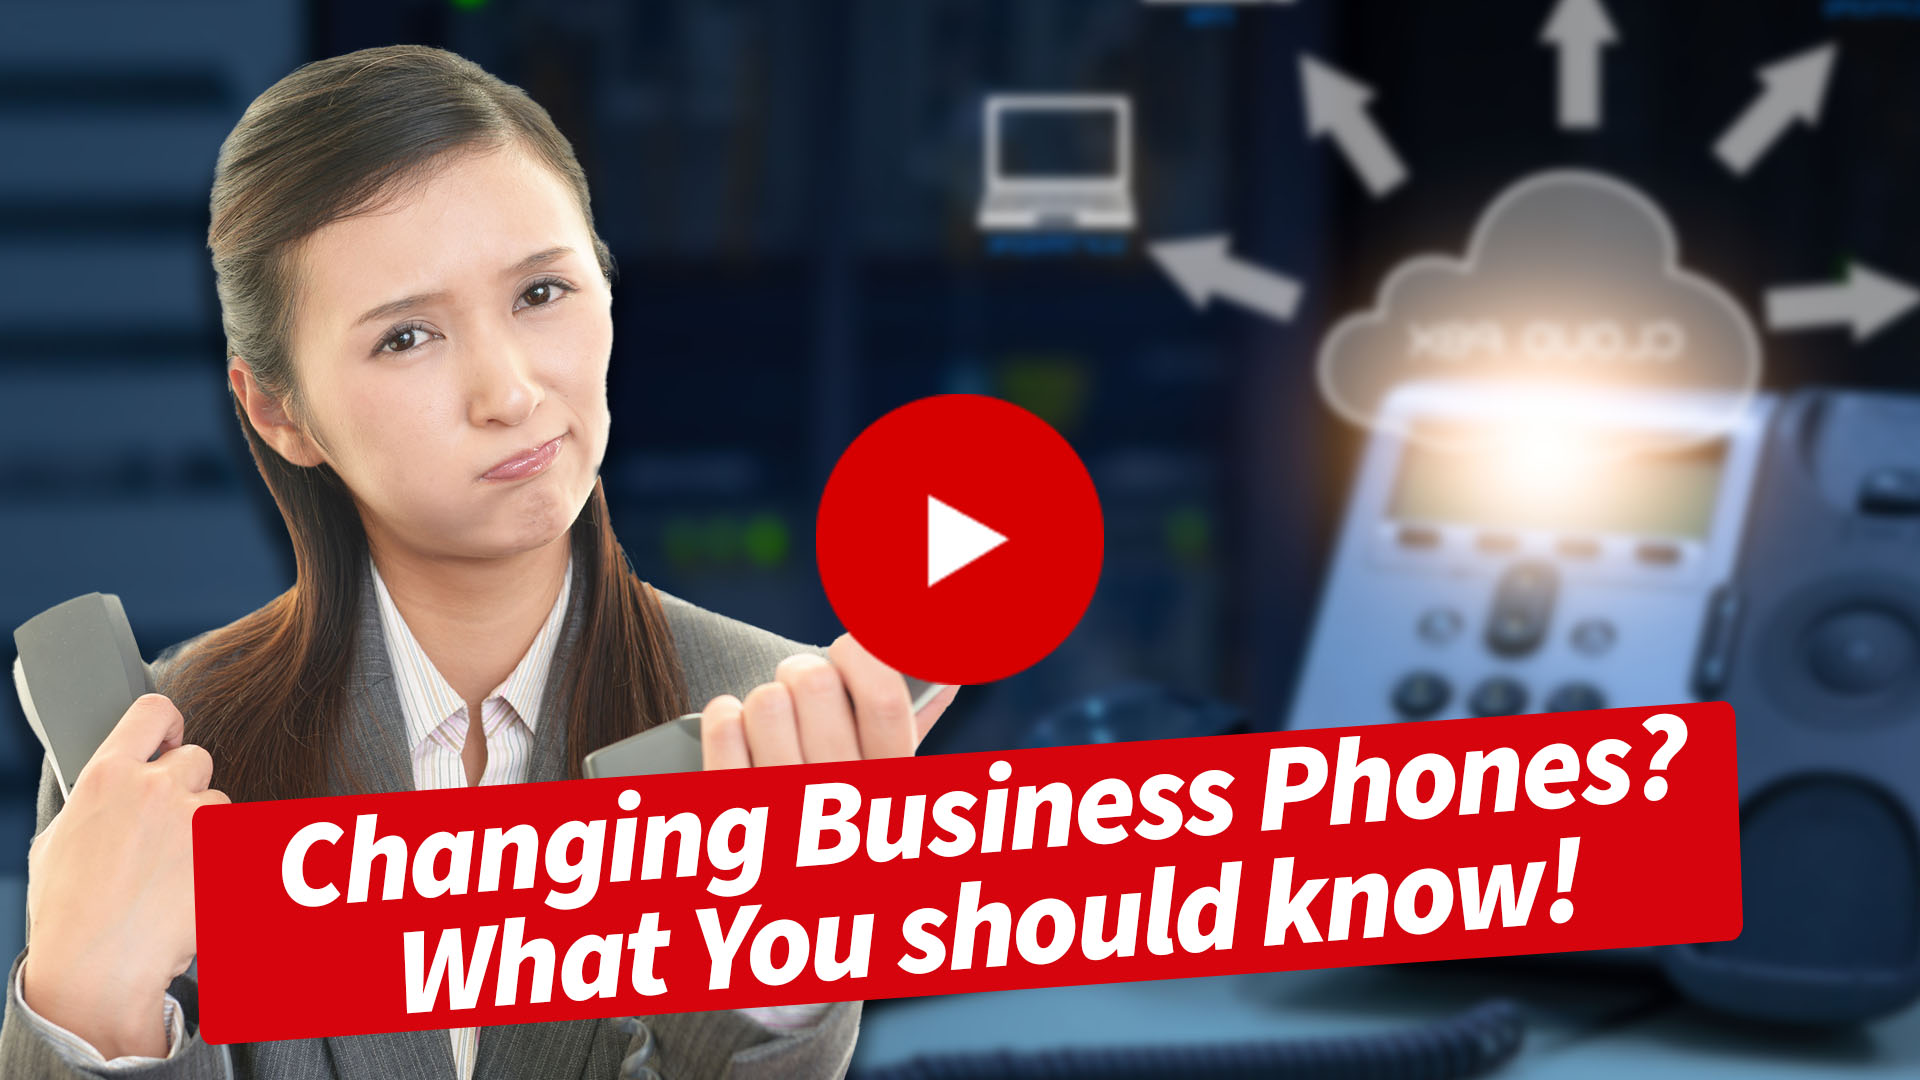 Switching Phone Systems - What You Should Know!